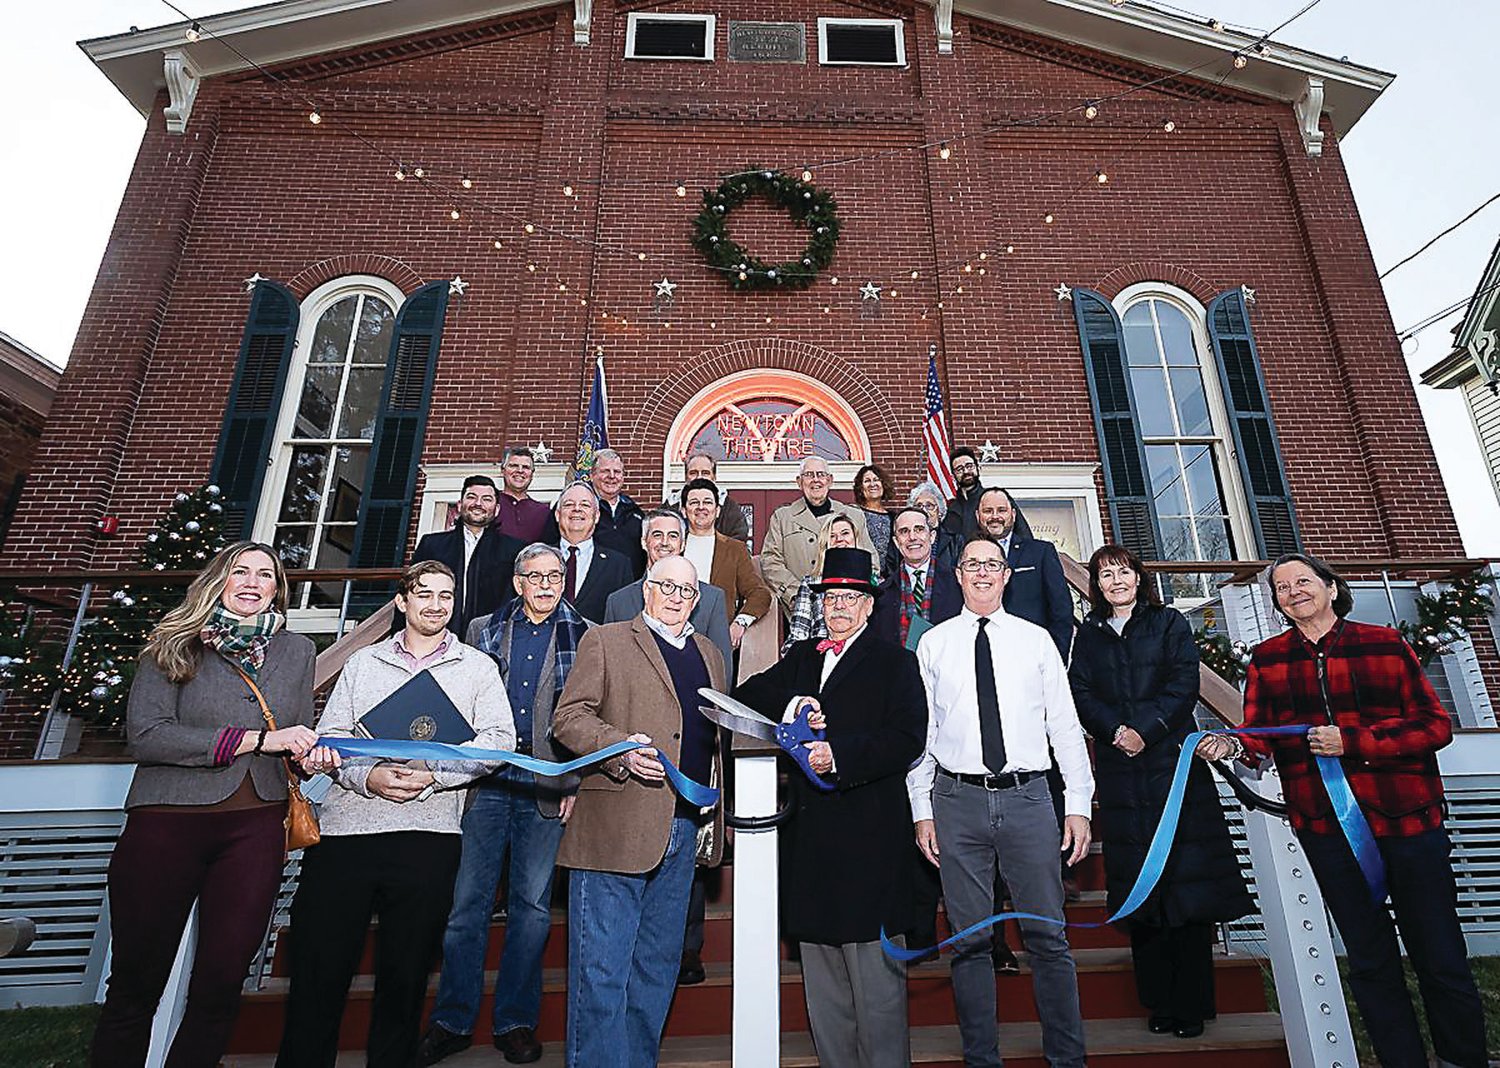 The ribbon-cutting for the newly renovated Newtown Theatre takes place on the theater’s new front steps.